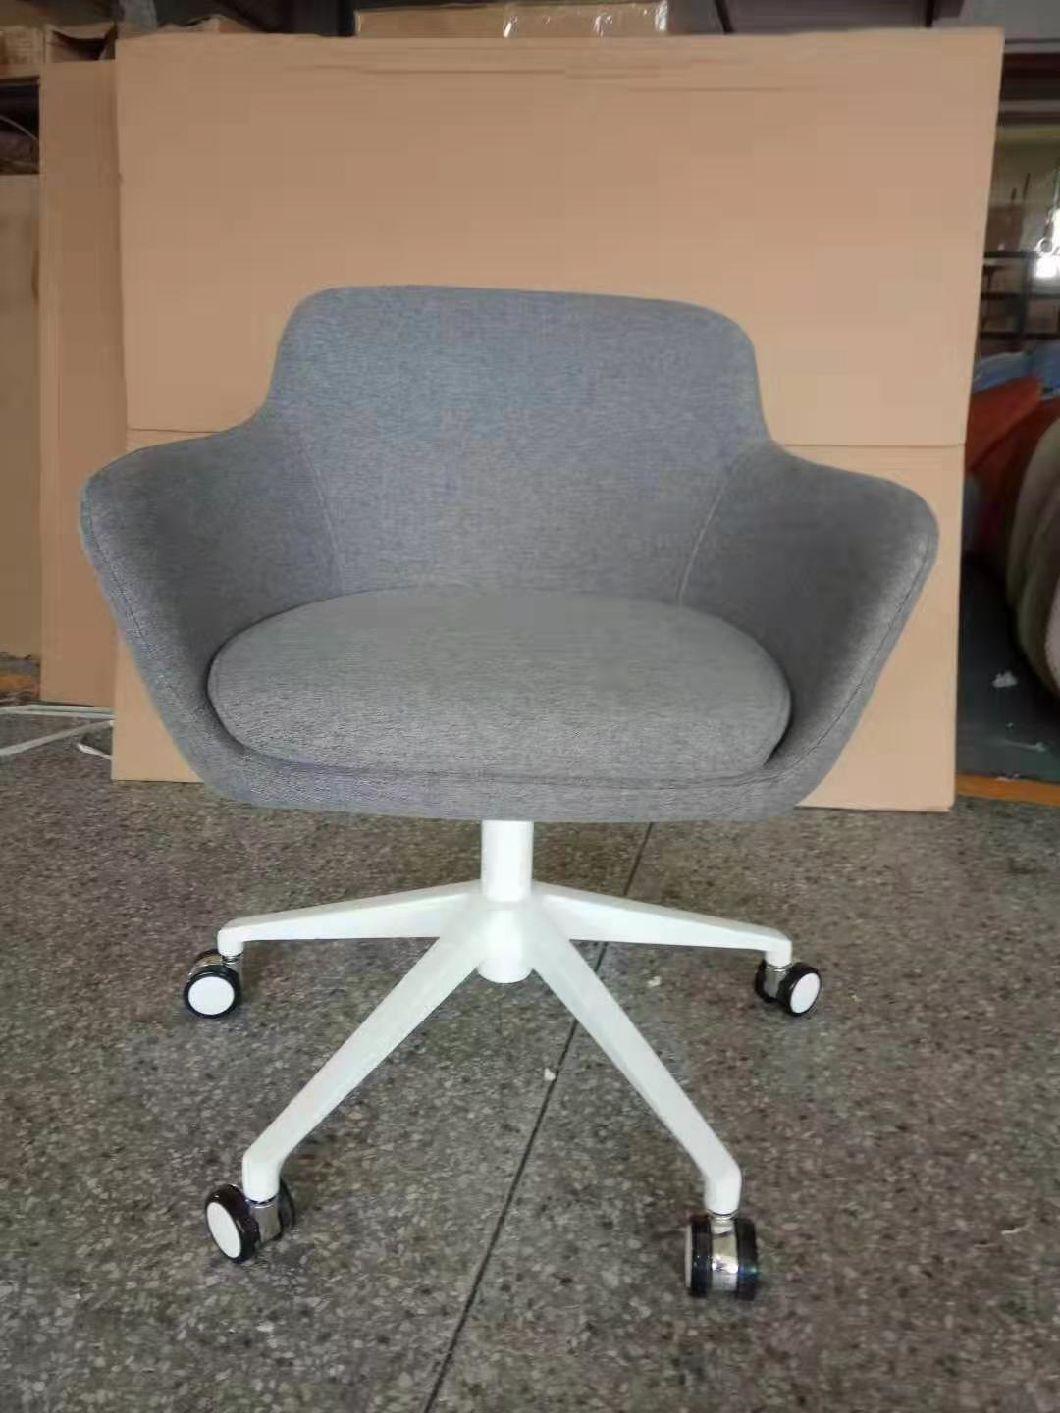 2019 New Moulded Injection Foam Soft Fabric Dining Chair